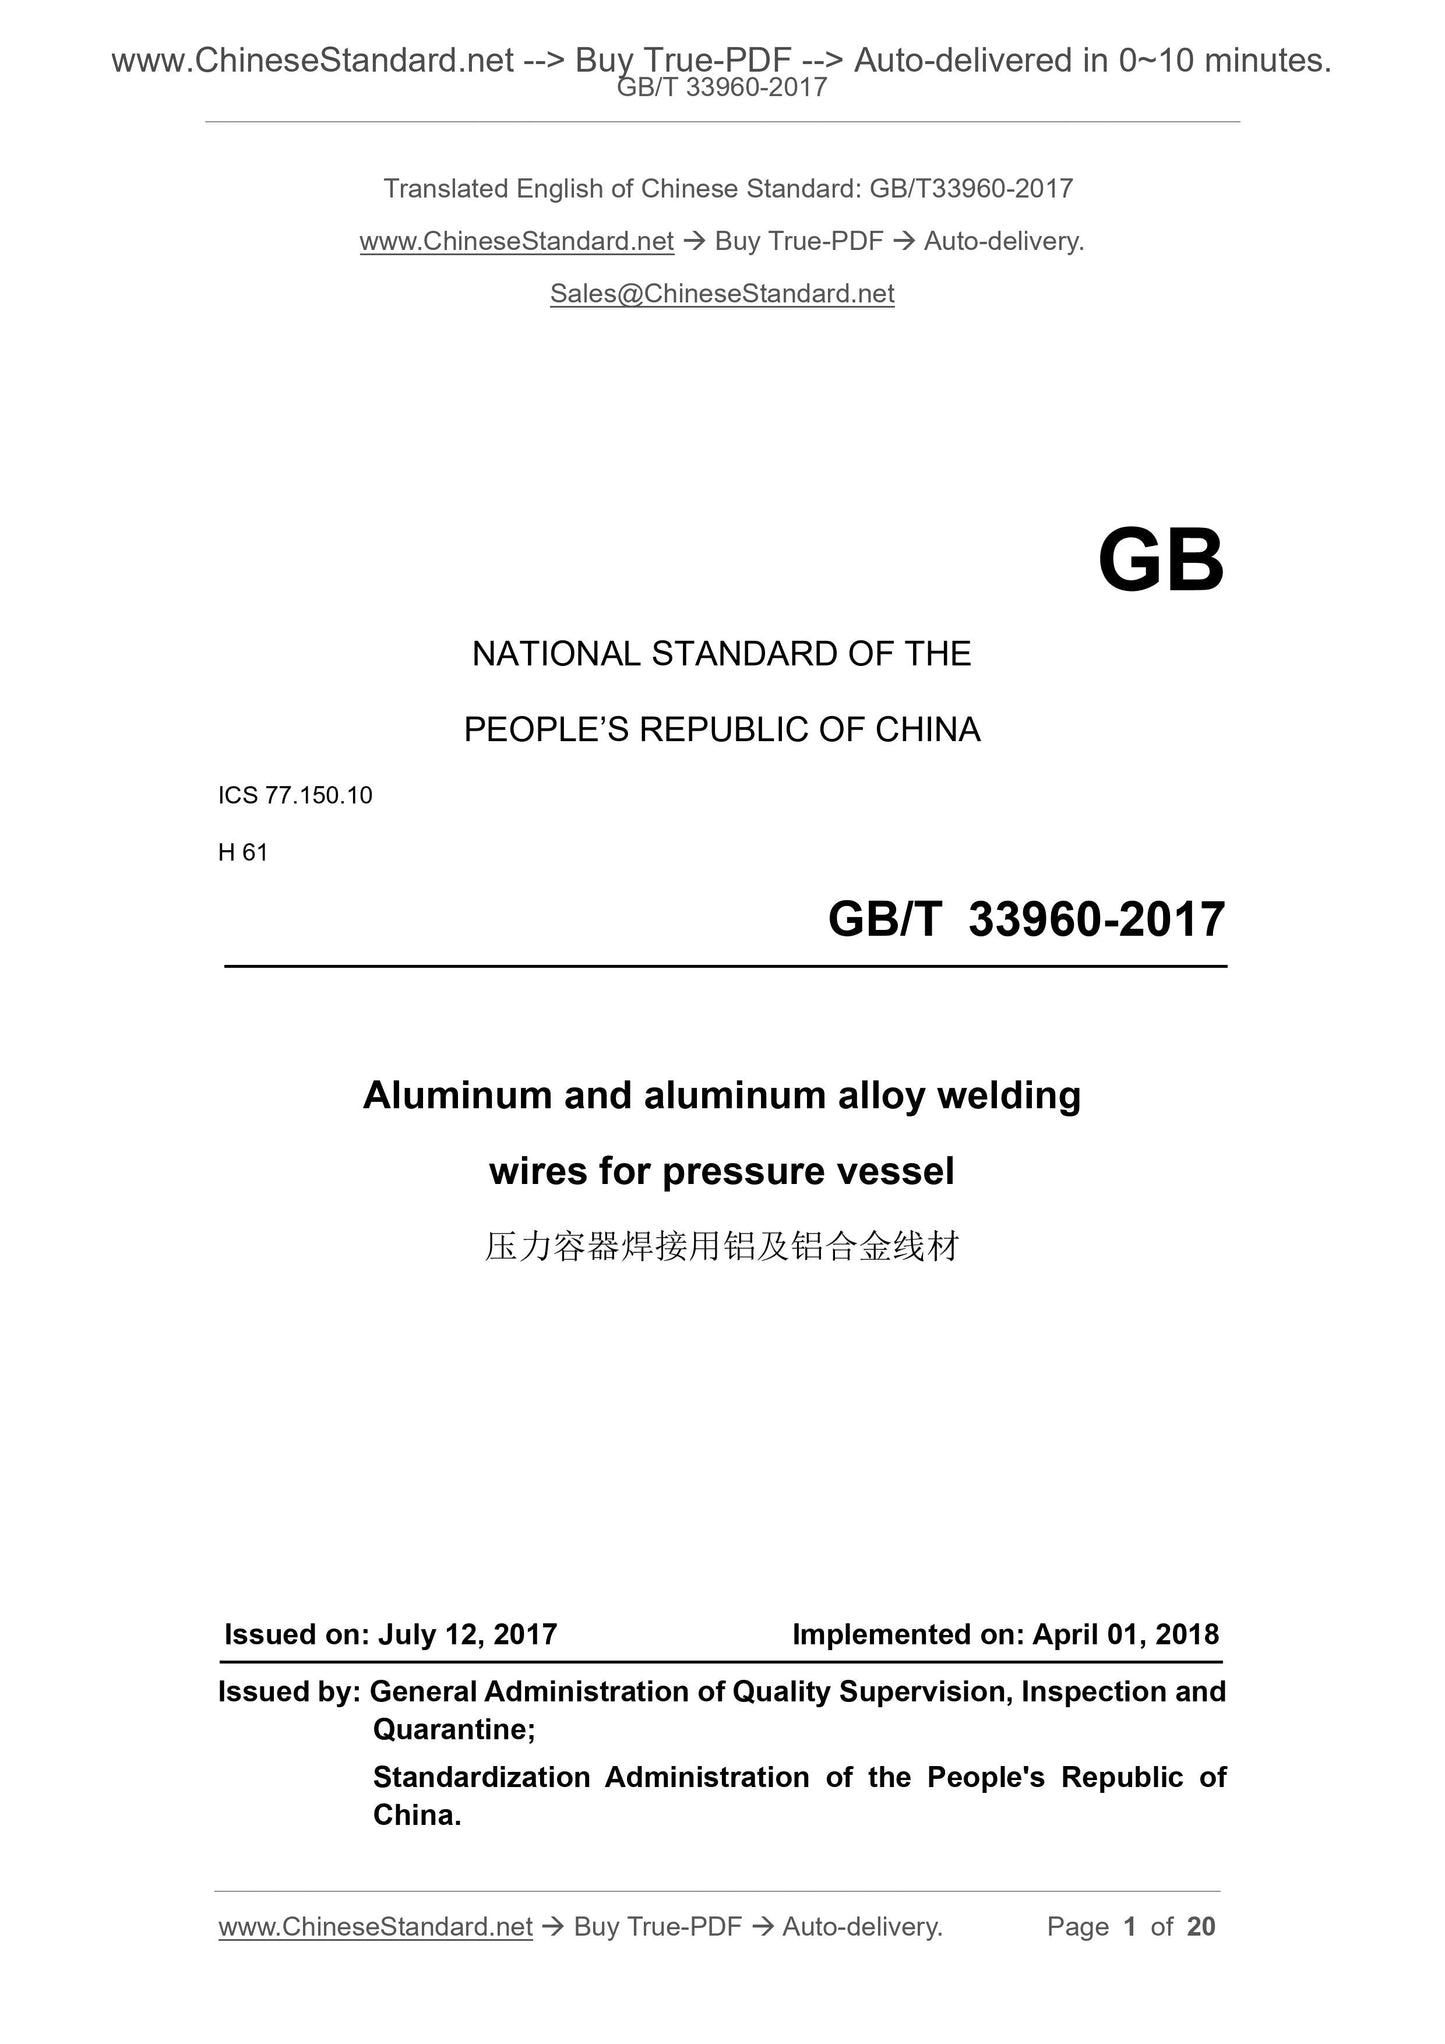 GB/T 33960-2017 Page 1